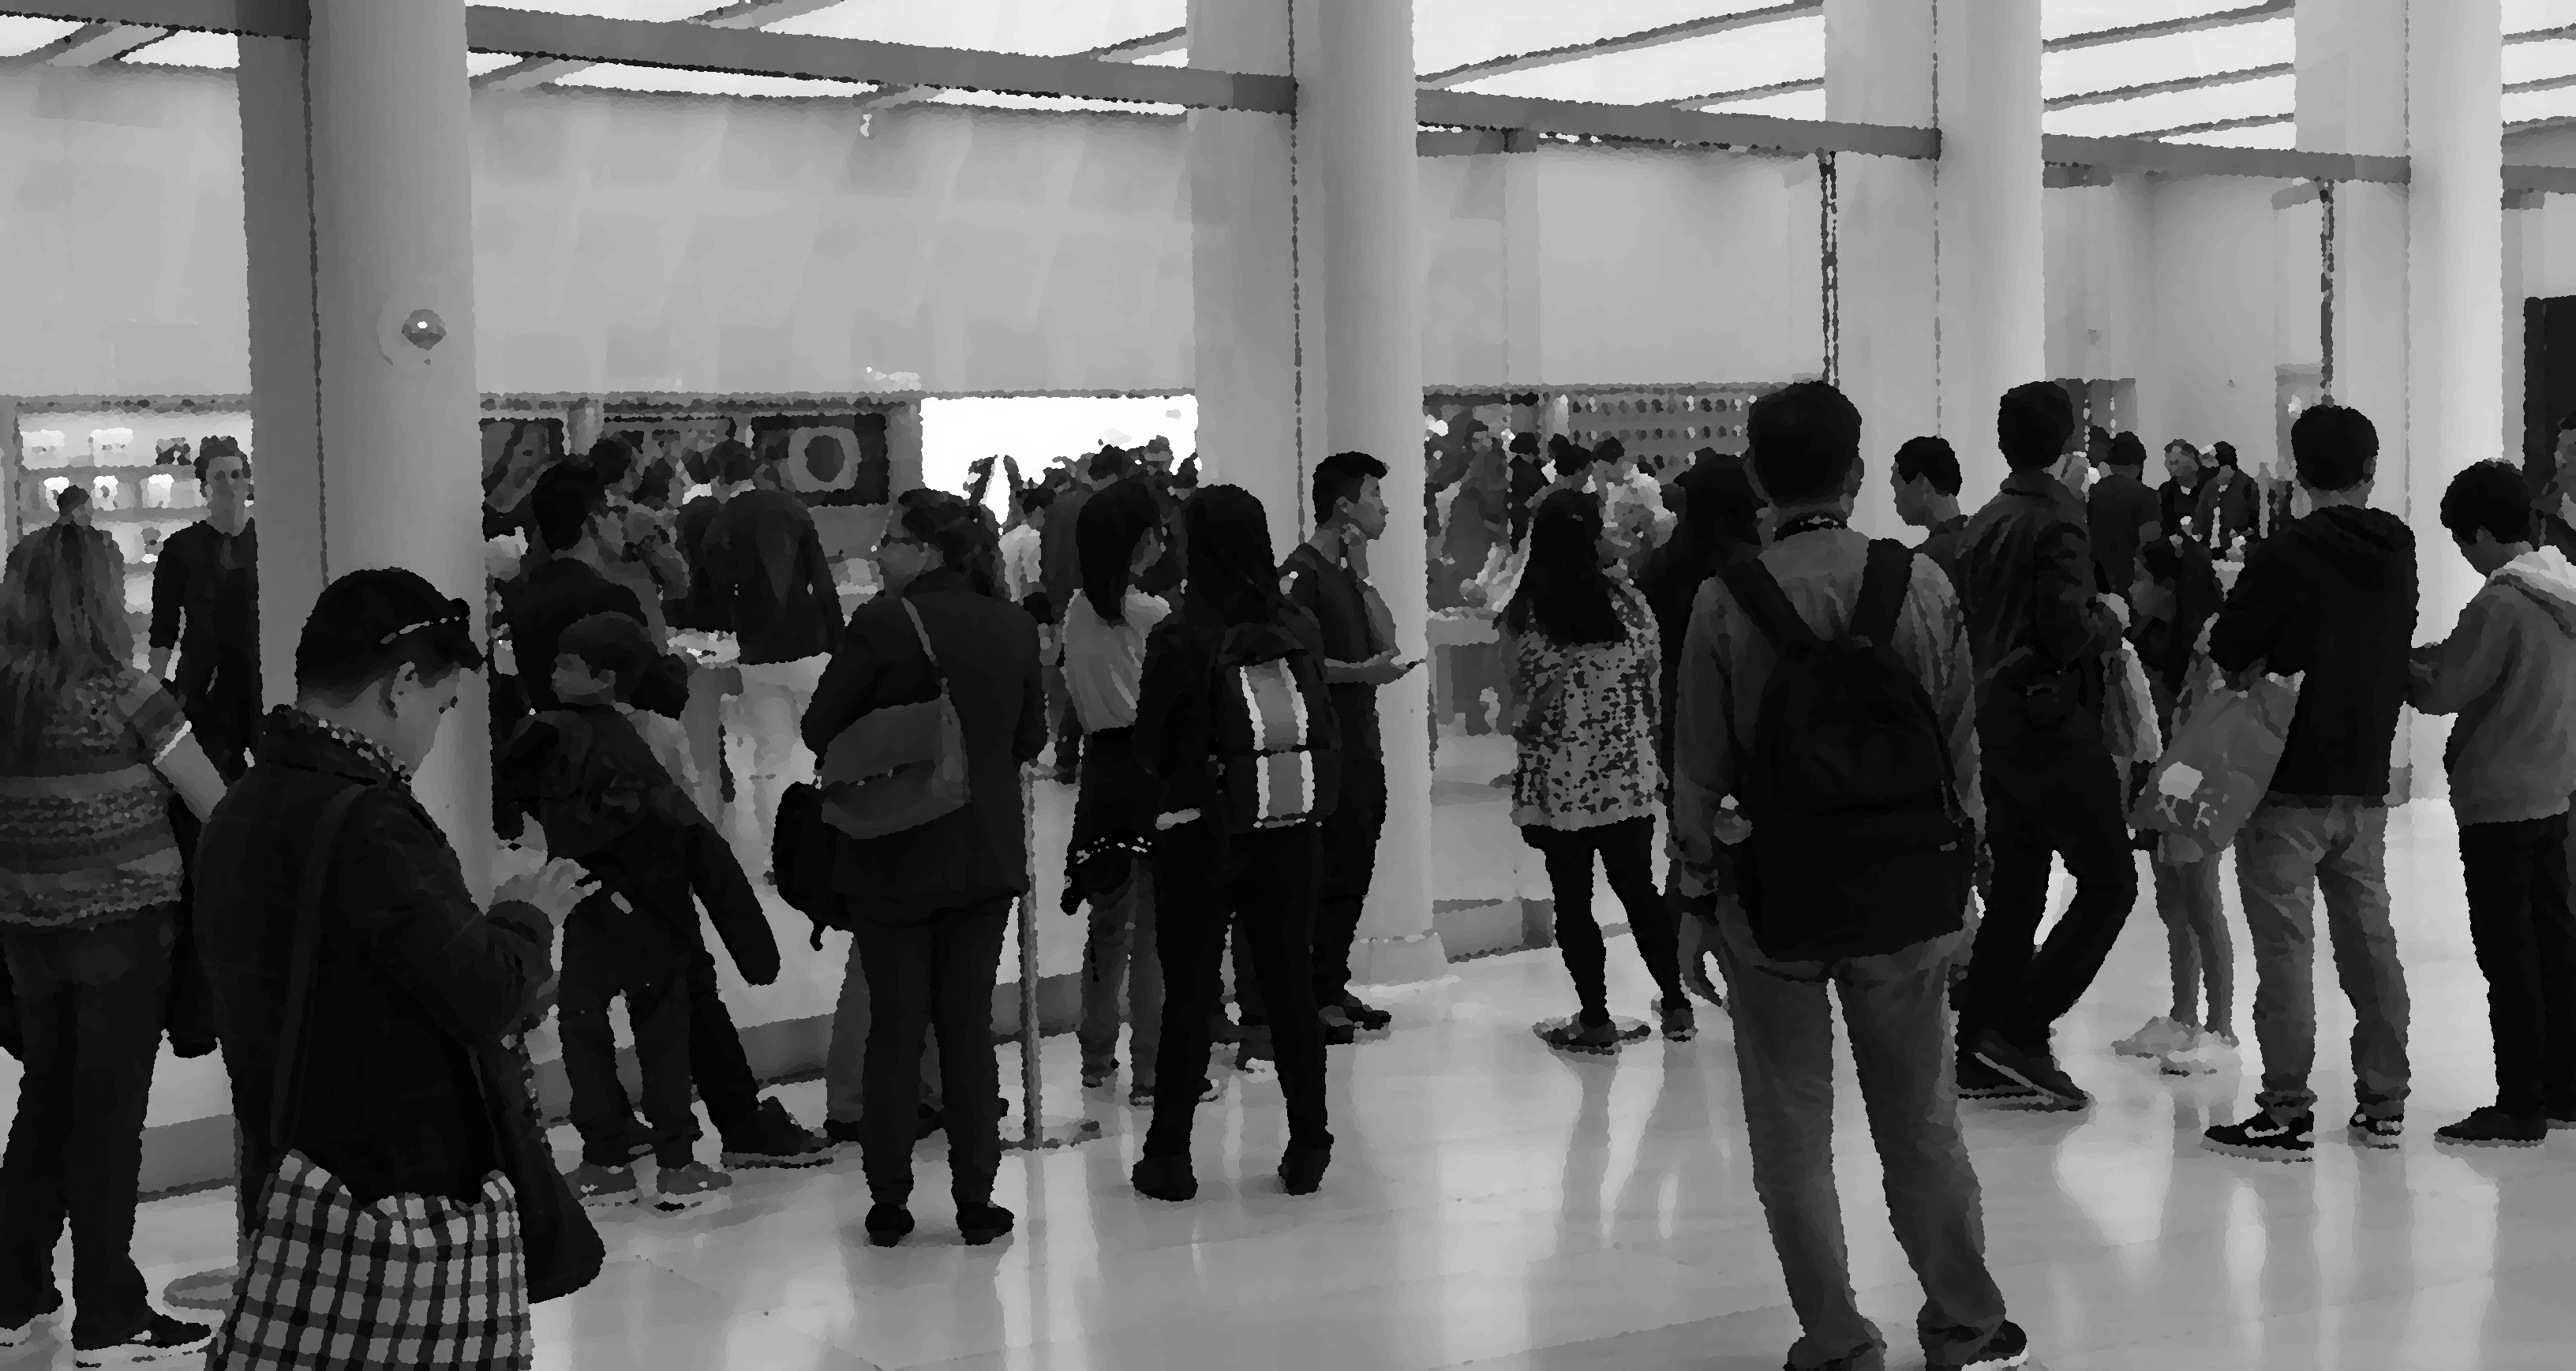 Figure 1.5: People Waiting to Enter the Apple Store at the Oculus, NYC (© 2016 Photo Credit: BGS, Shot on iPhone 6)